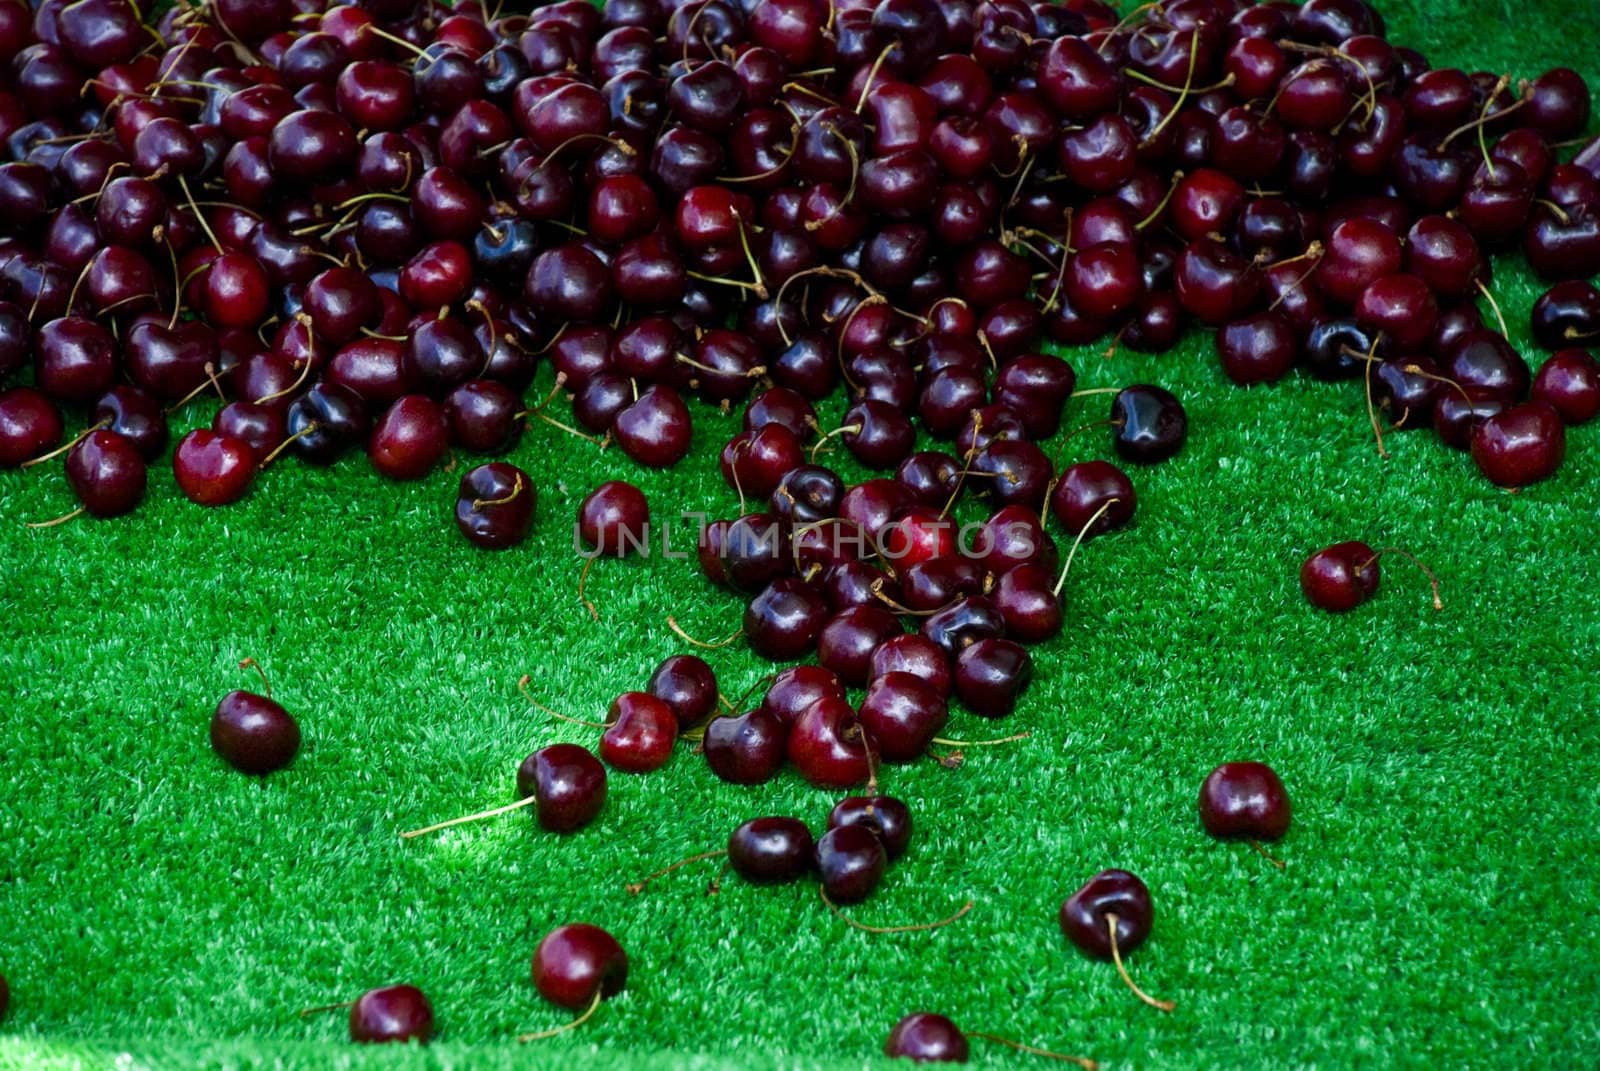 Cherry for sale at the market